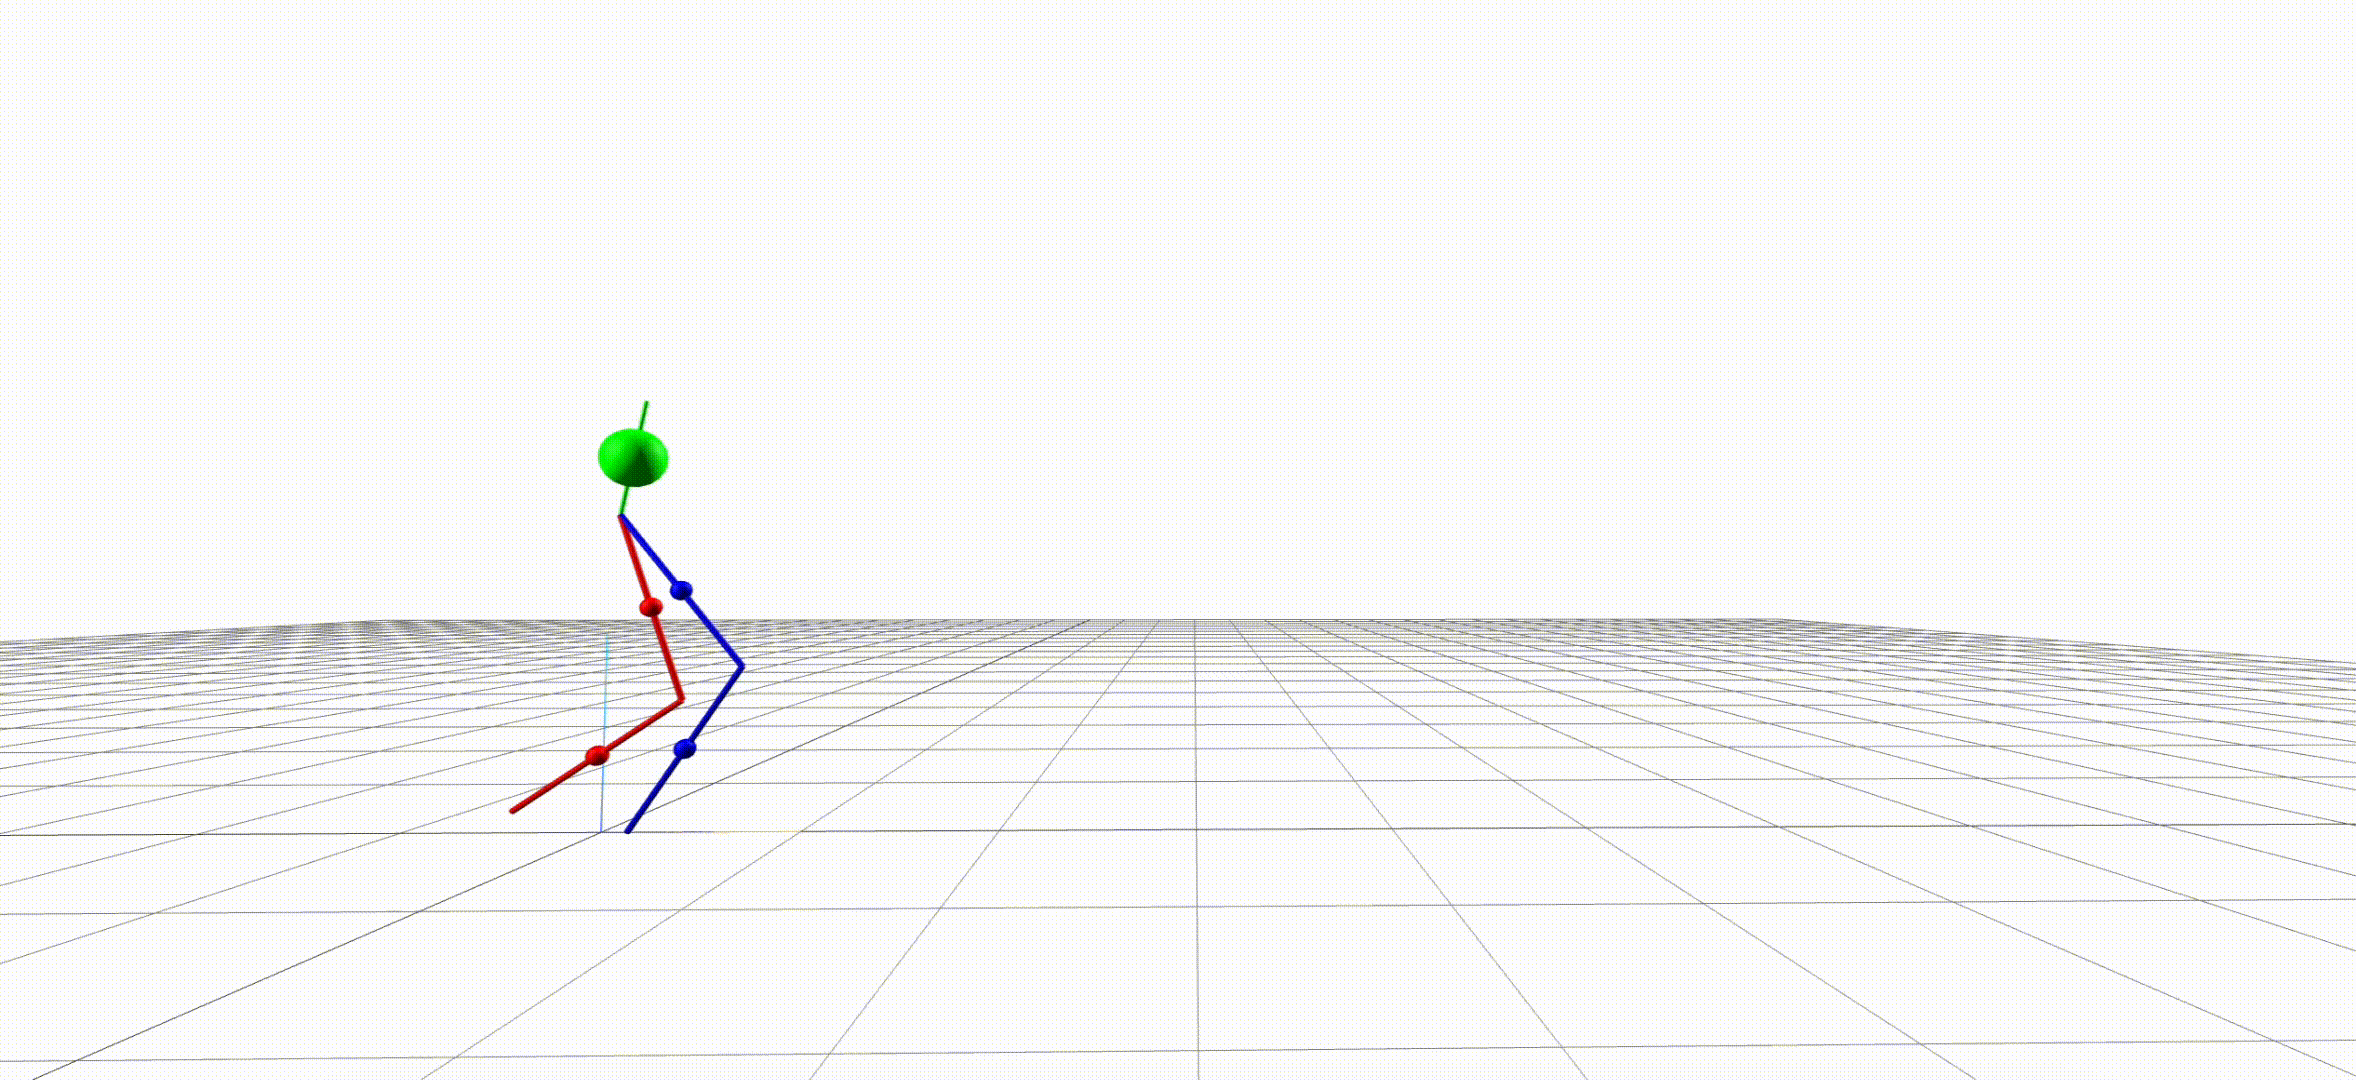 Modular Gait Optimization - From Unit Moves to Full Trajectory in Bipedal Systems